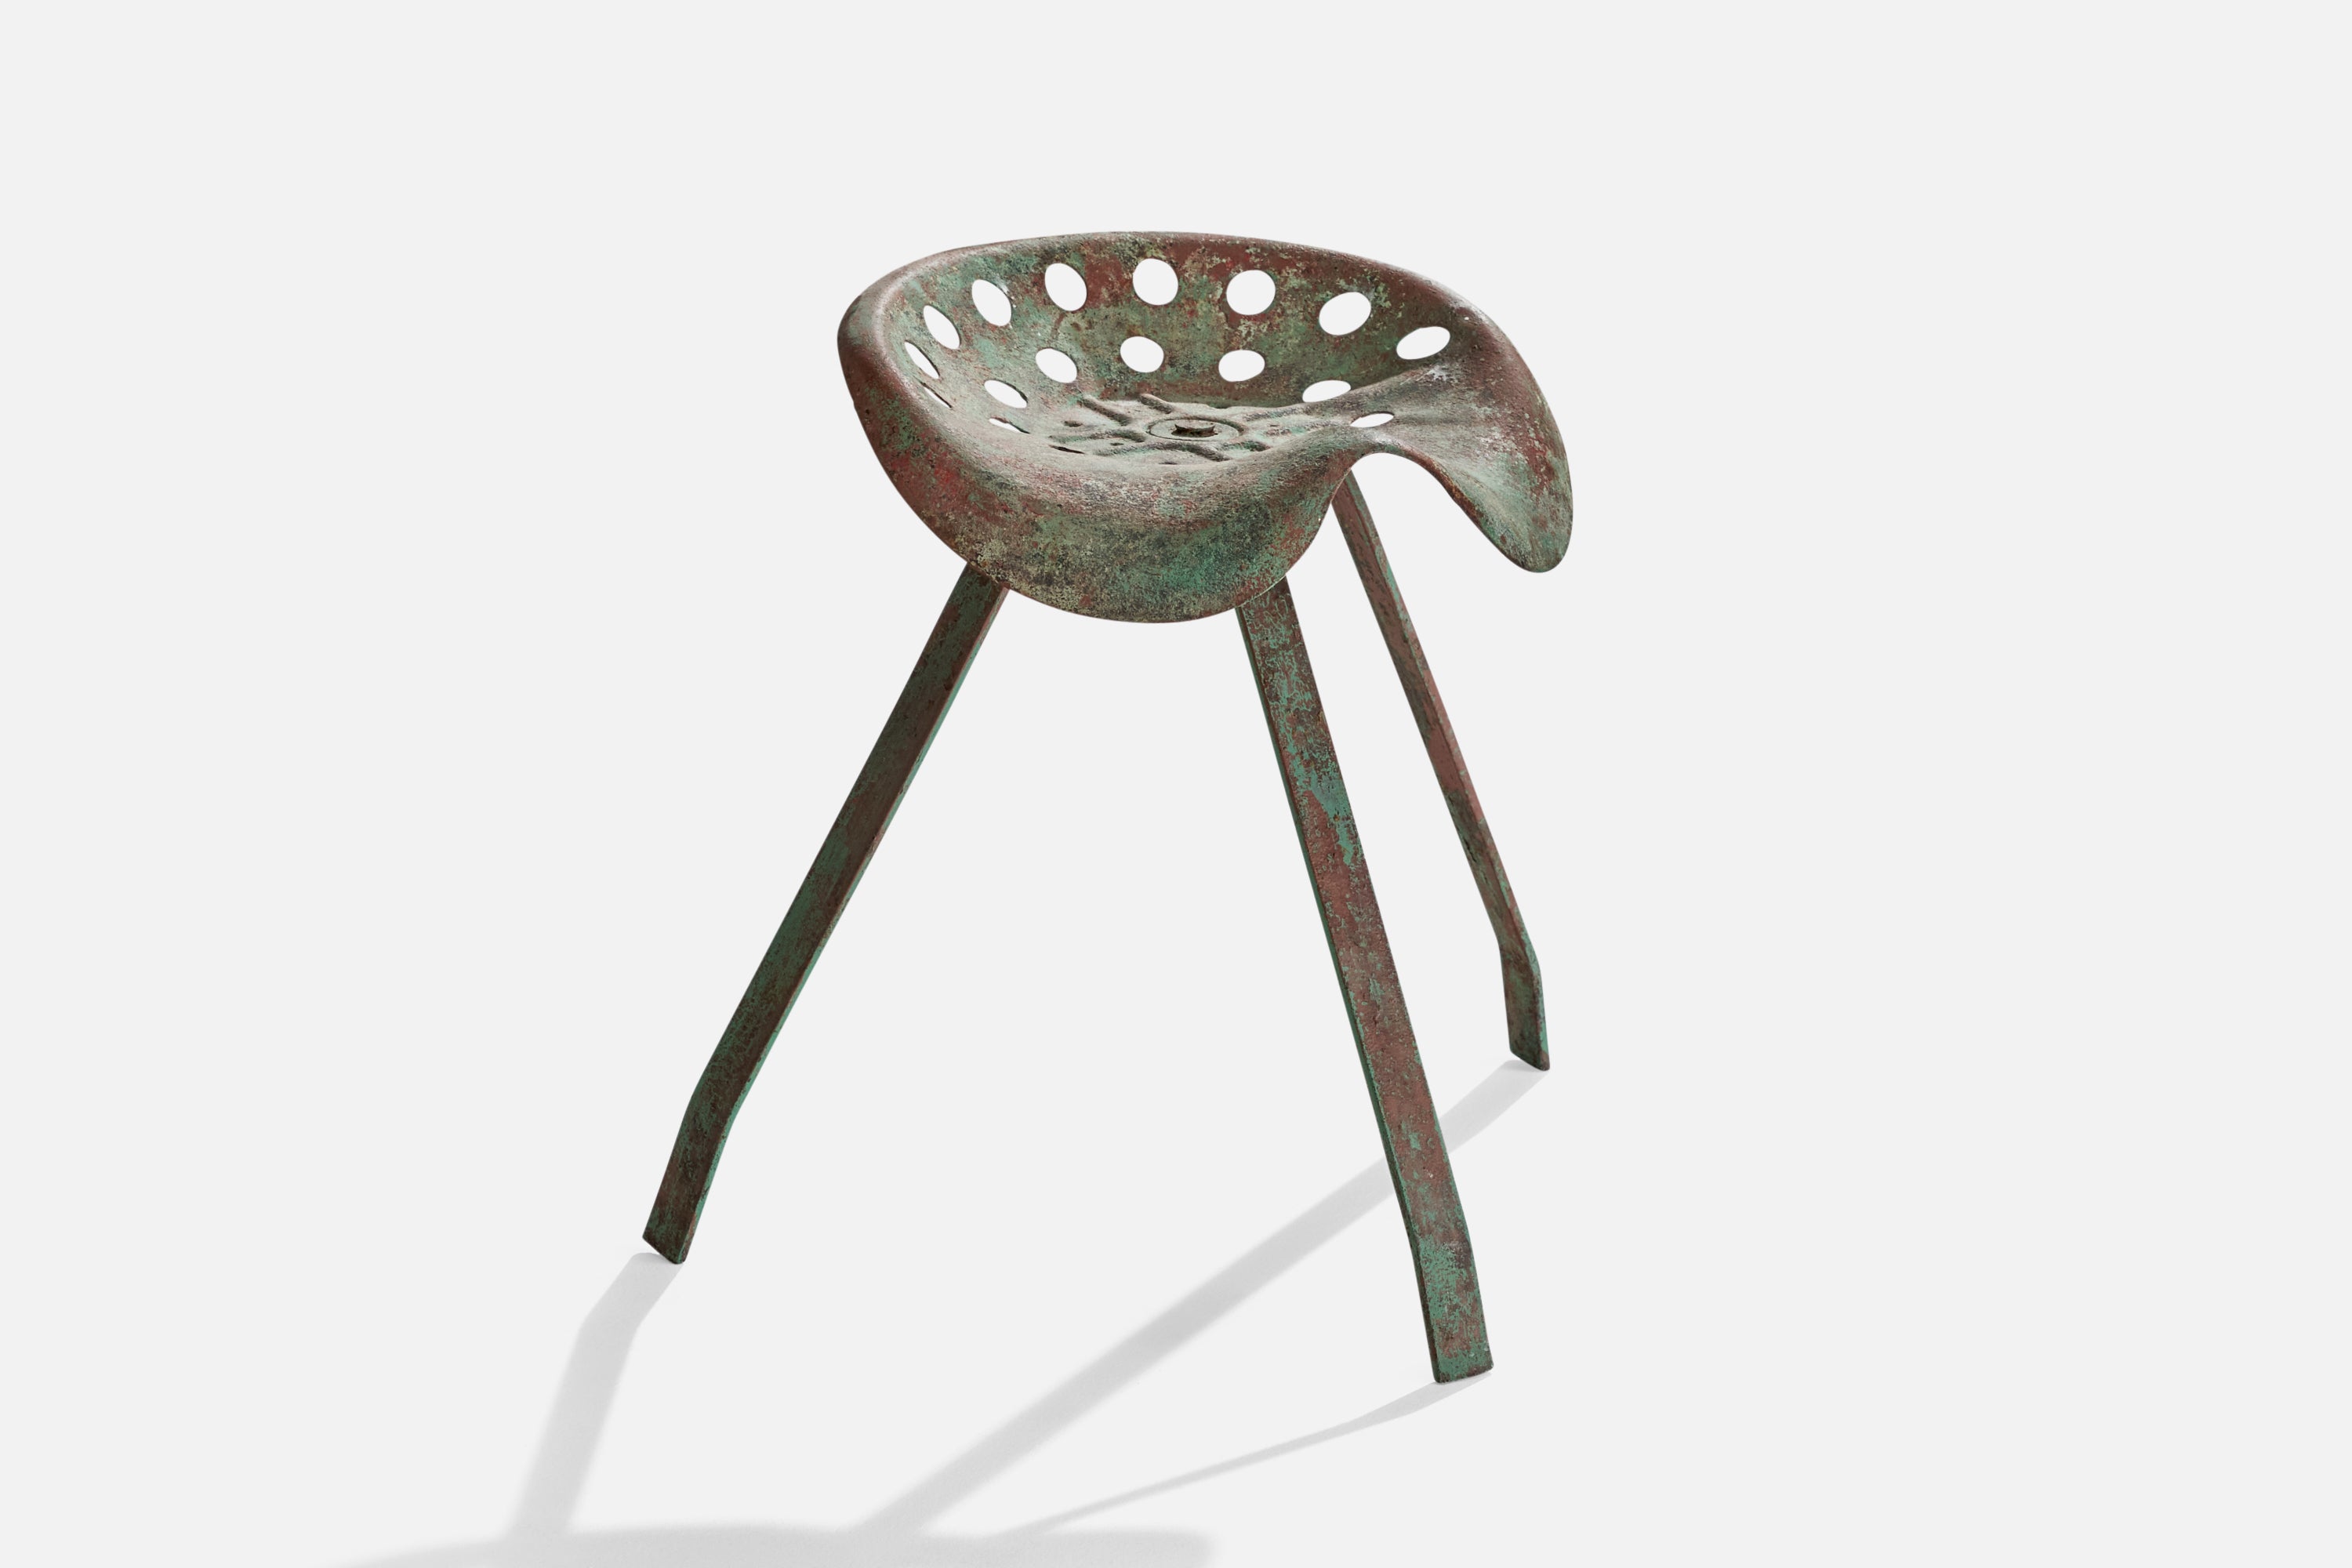 A green-painted metal industrial stool designed and produced in the US, 1930s.

Seat height 17” 
